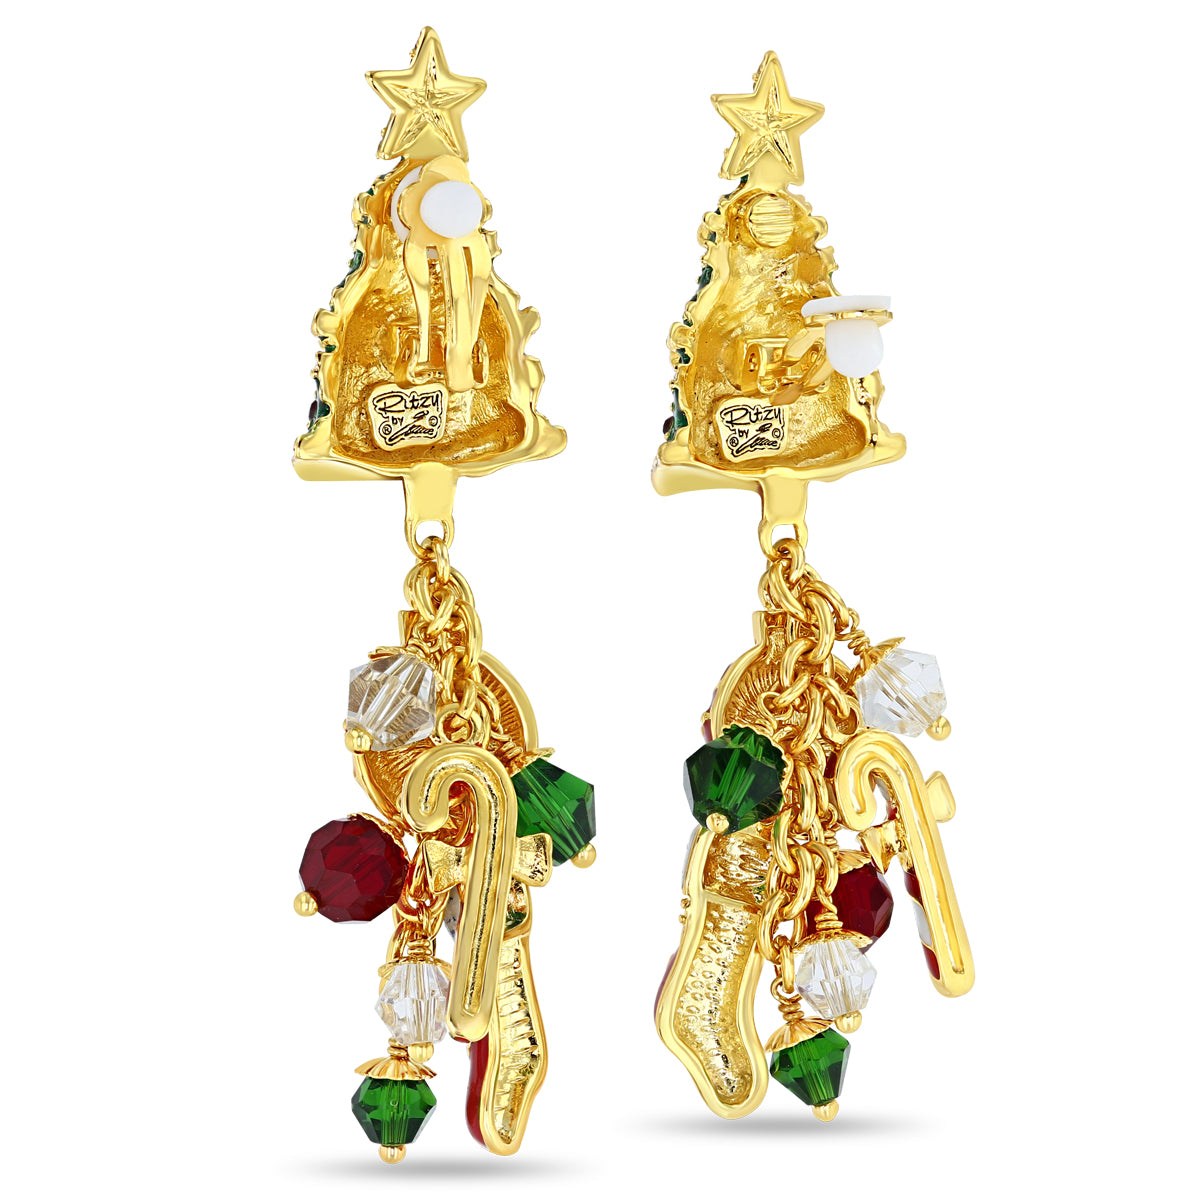 Christmas Tree Multi Charm Earrings for Women by Ritzy Couture DeLuxe - 18k Gold Plated